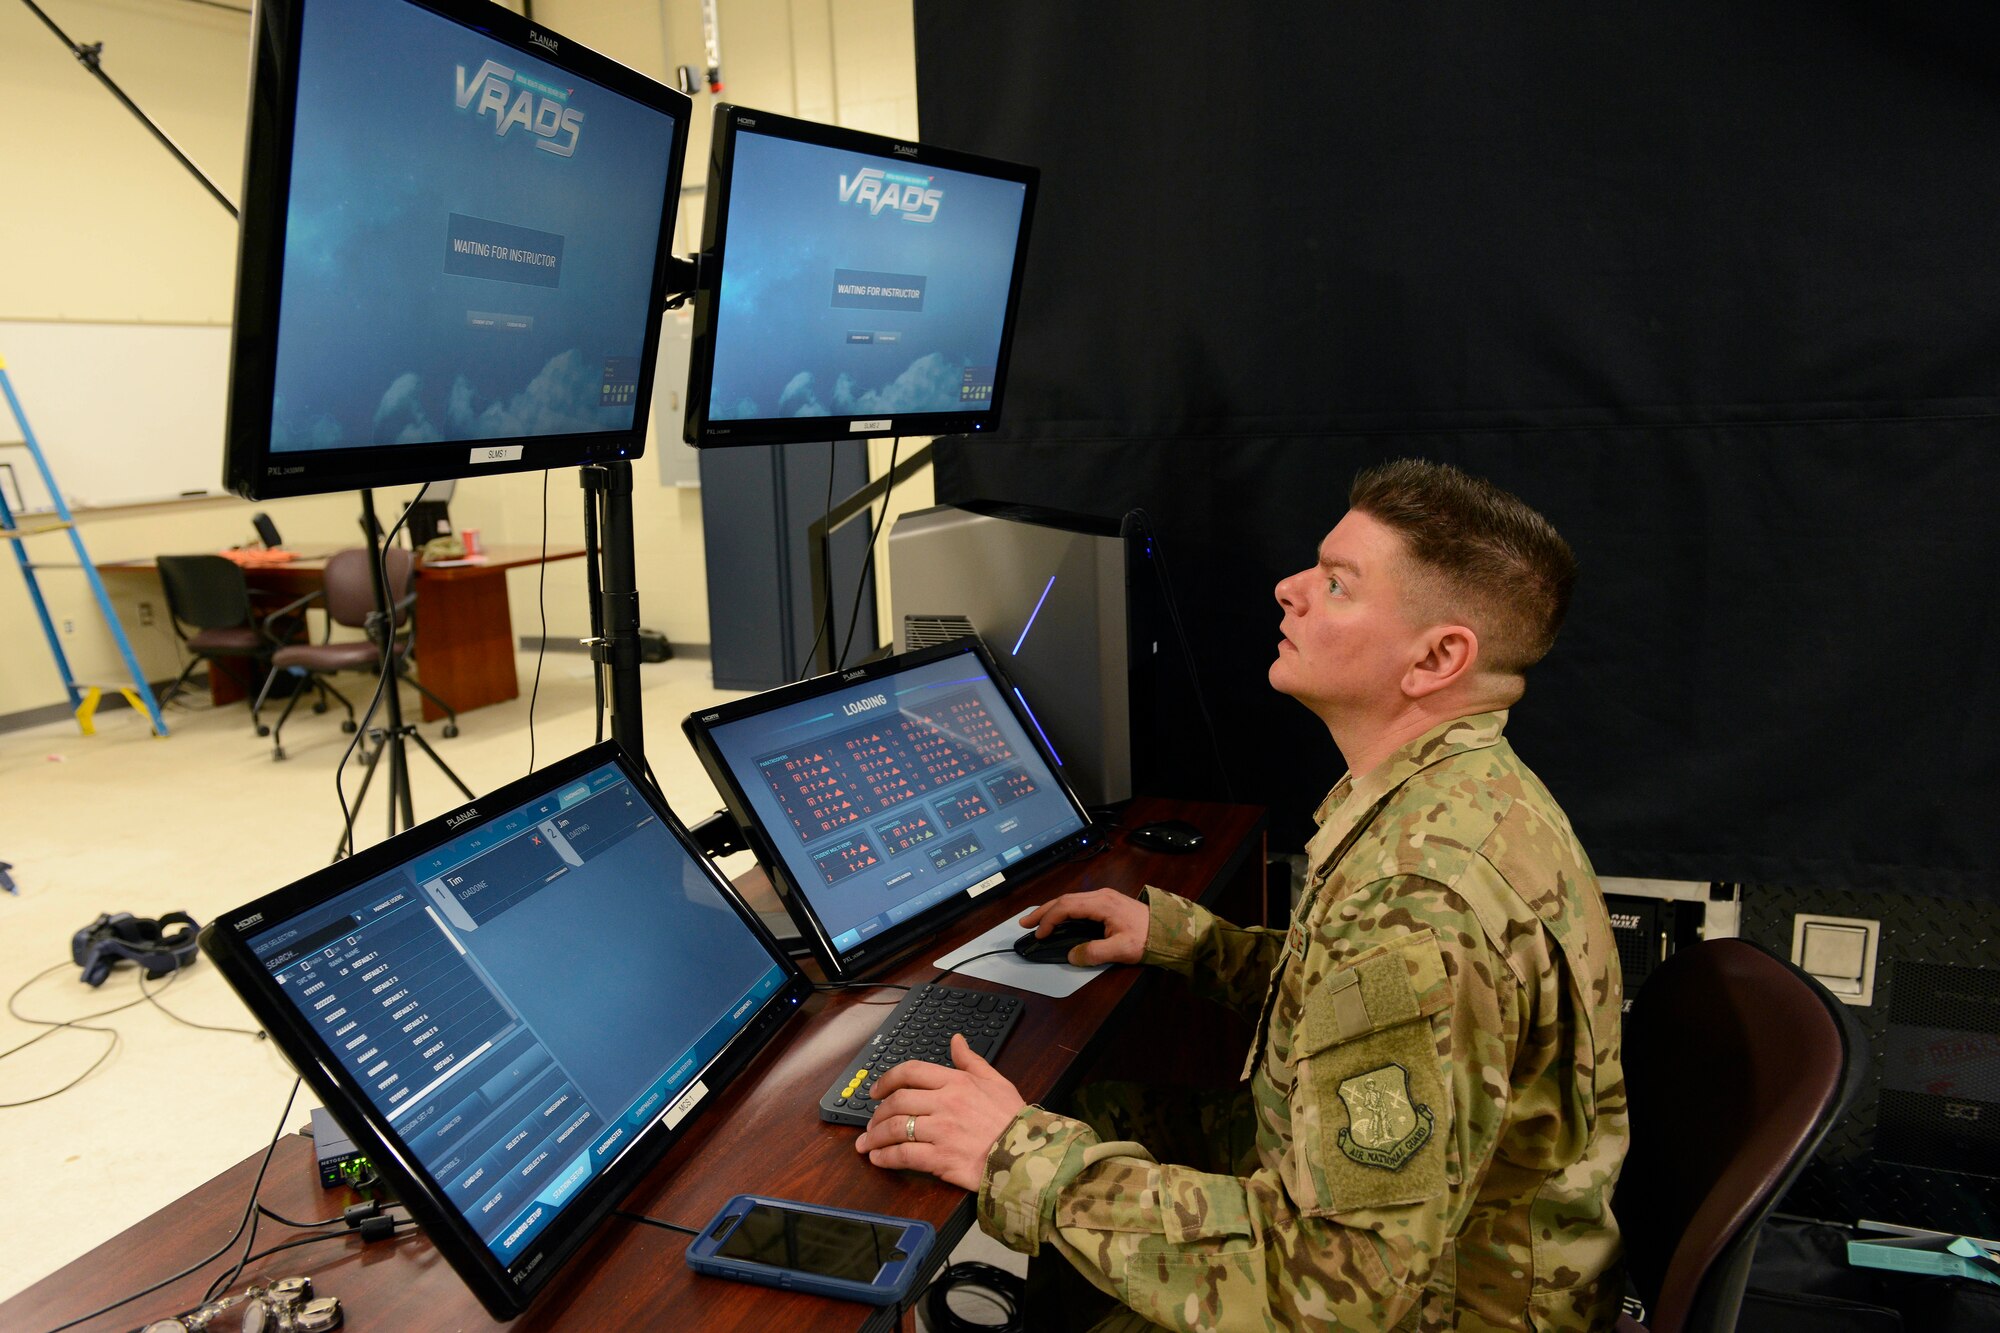 Master Sgt. Joseph Amato, 103rd Operations Group Evaluator Loadmaster, monitors the Virtual Reality Aerial Delivery Suite system during a training session at Bradley Air National Guard Base on March 29, 2019. The VRADS system is designed to supplement training for loadmasters in a realistic virtual atmosphere. (U.S. Air Force photo by Staff Sgt. Chad Warren)